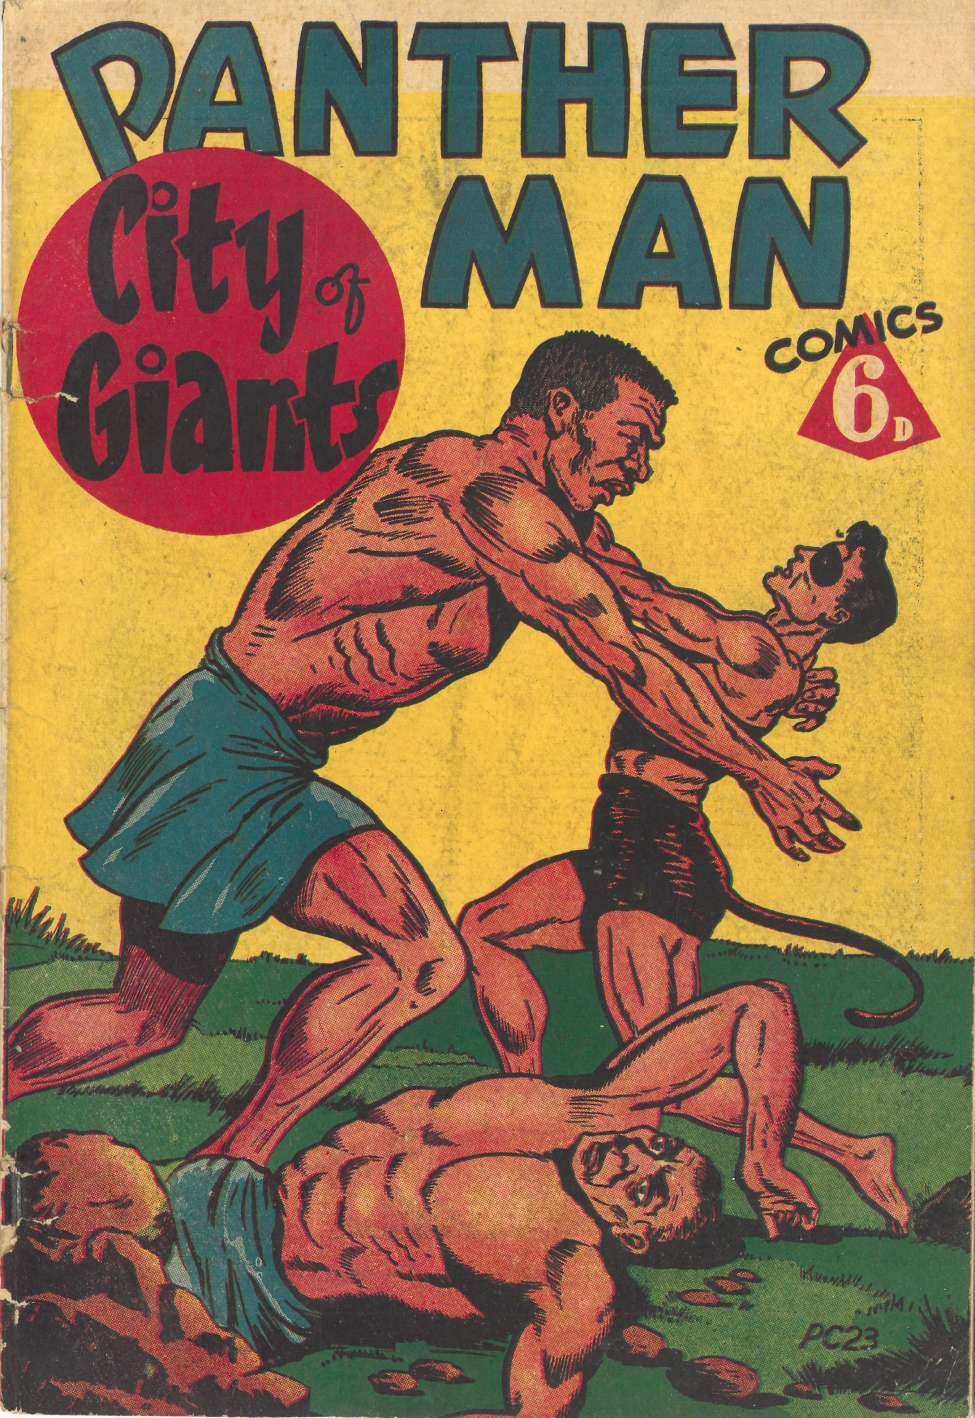 Book Cover For Panther Man - City of Giants